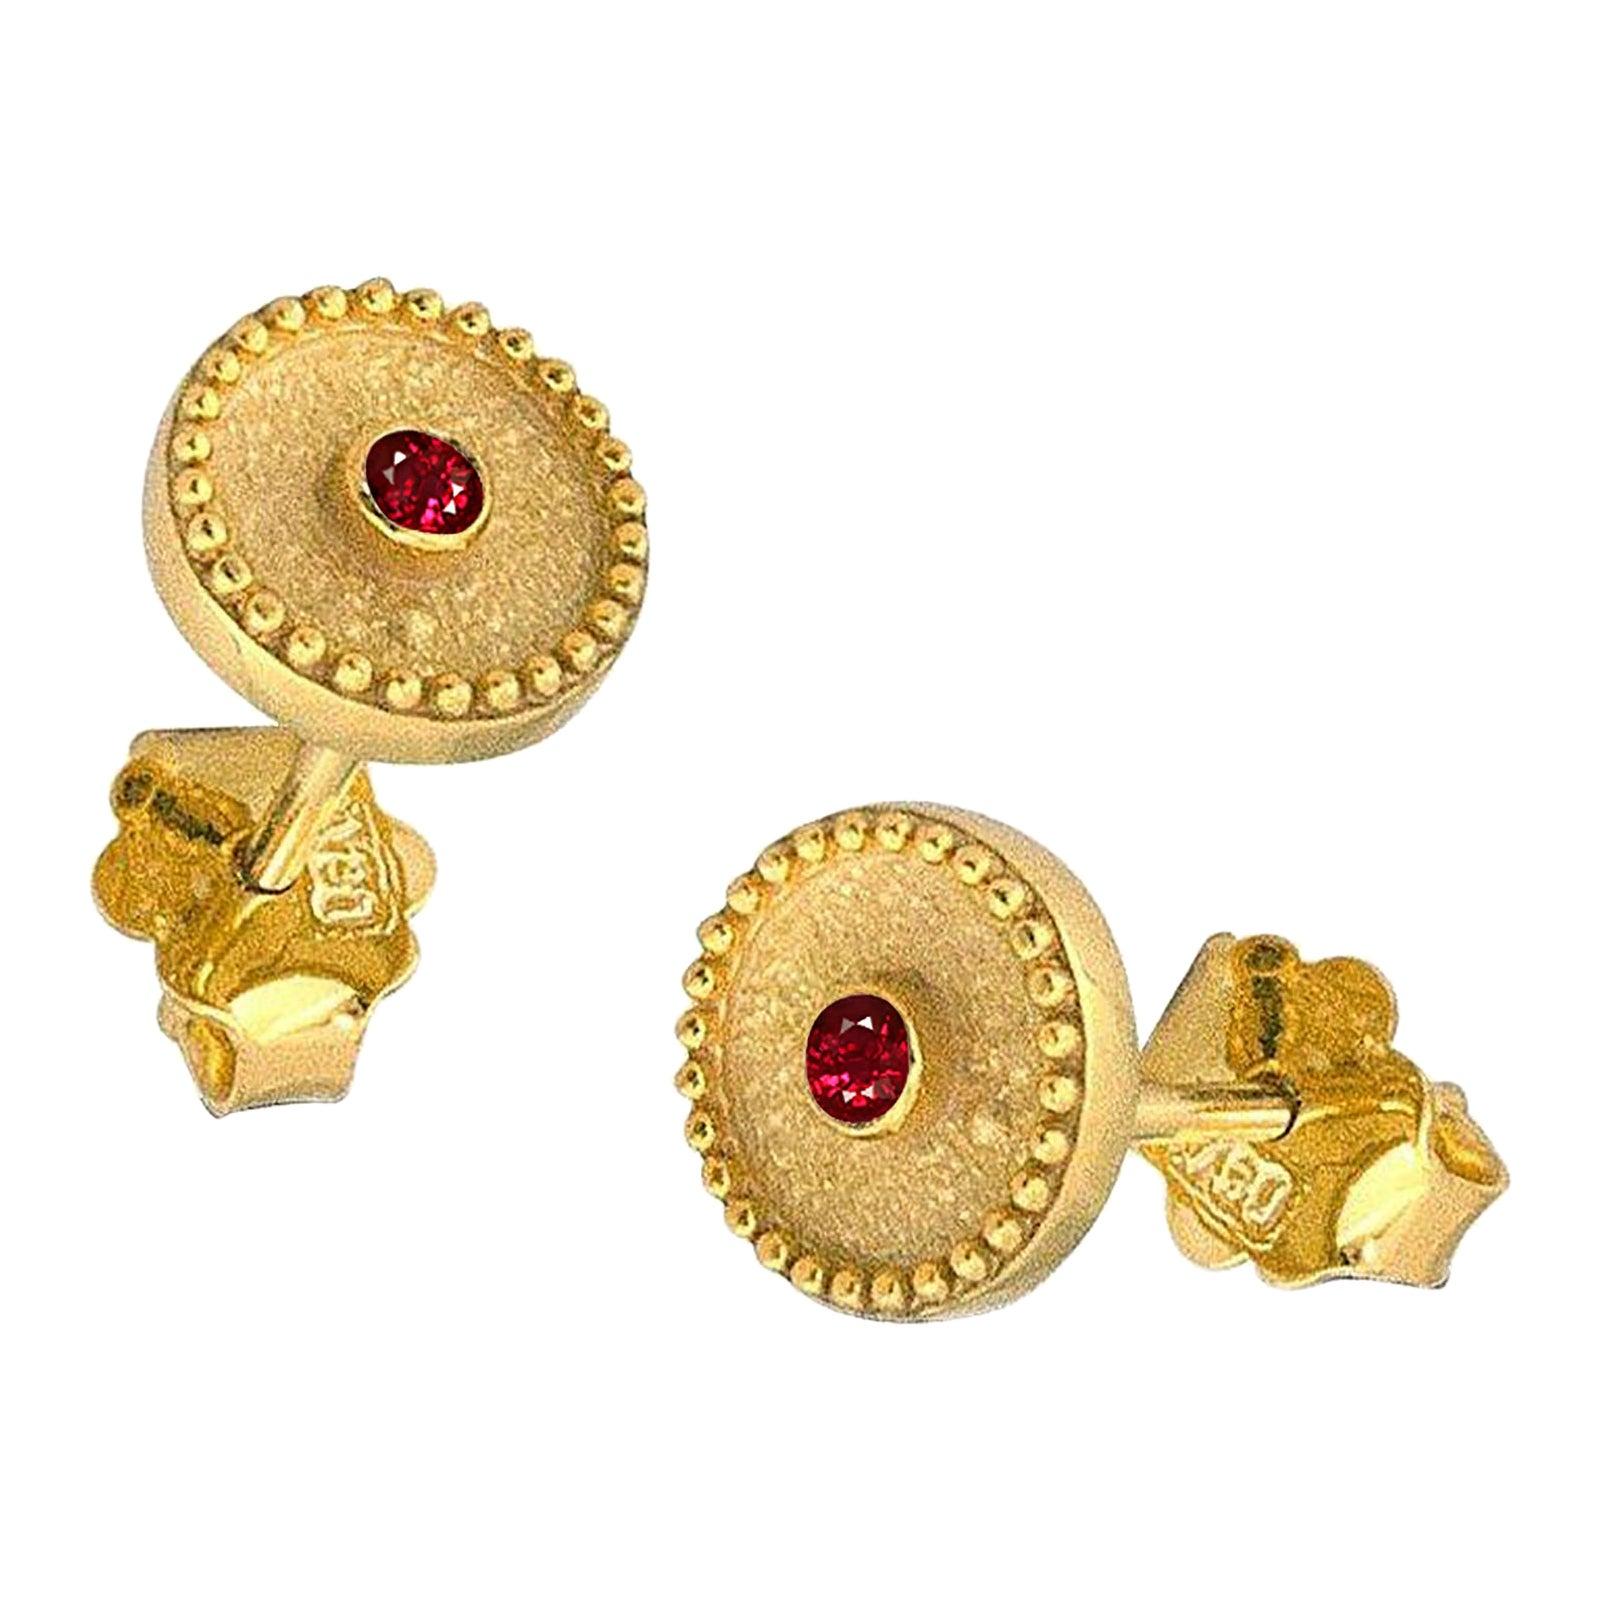 Round Cut Georgios Collections 18 Karat Yellow Gold Solitaire Ruby Stud Earrings